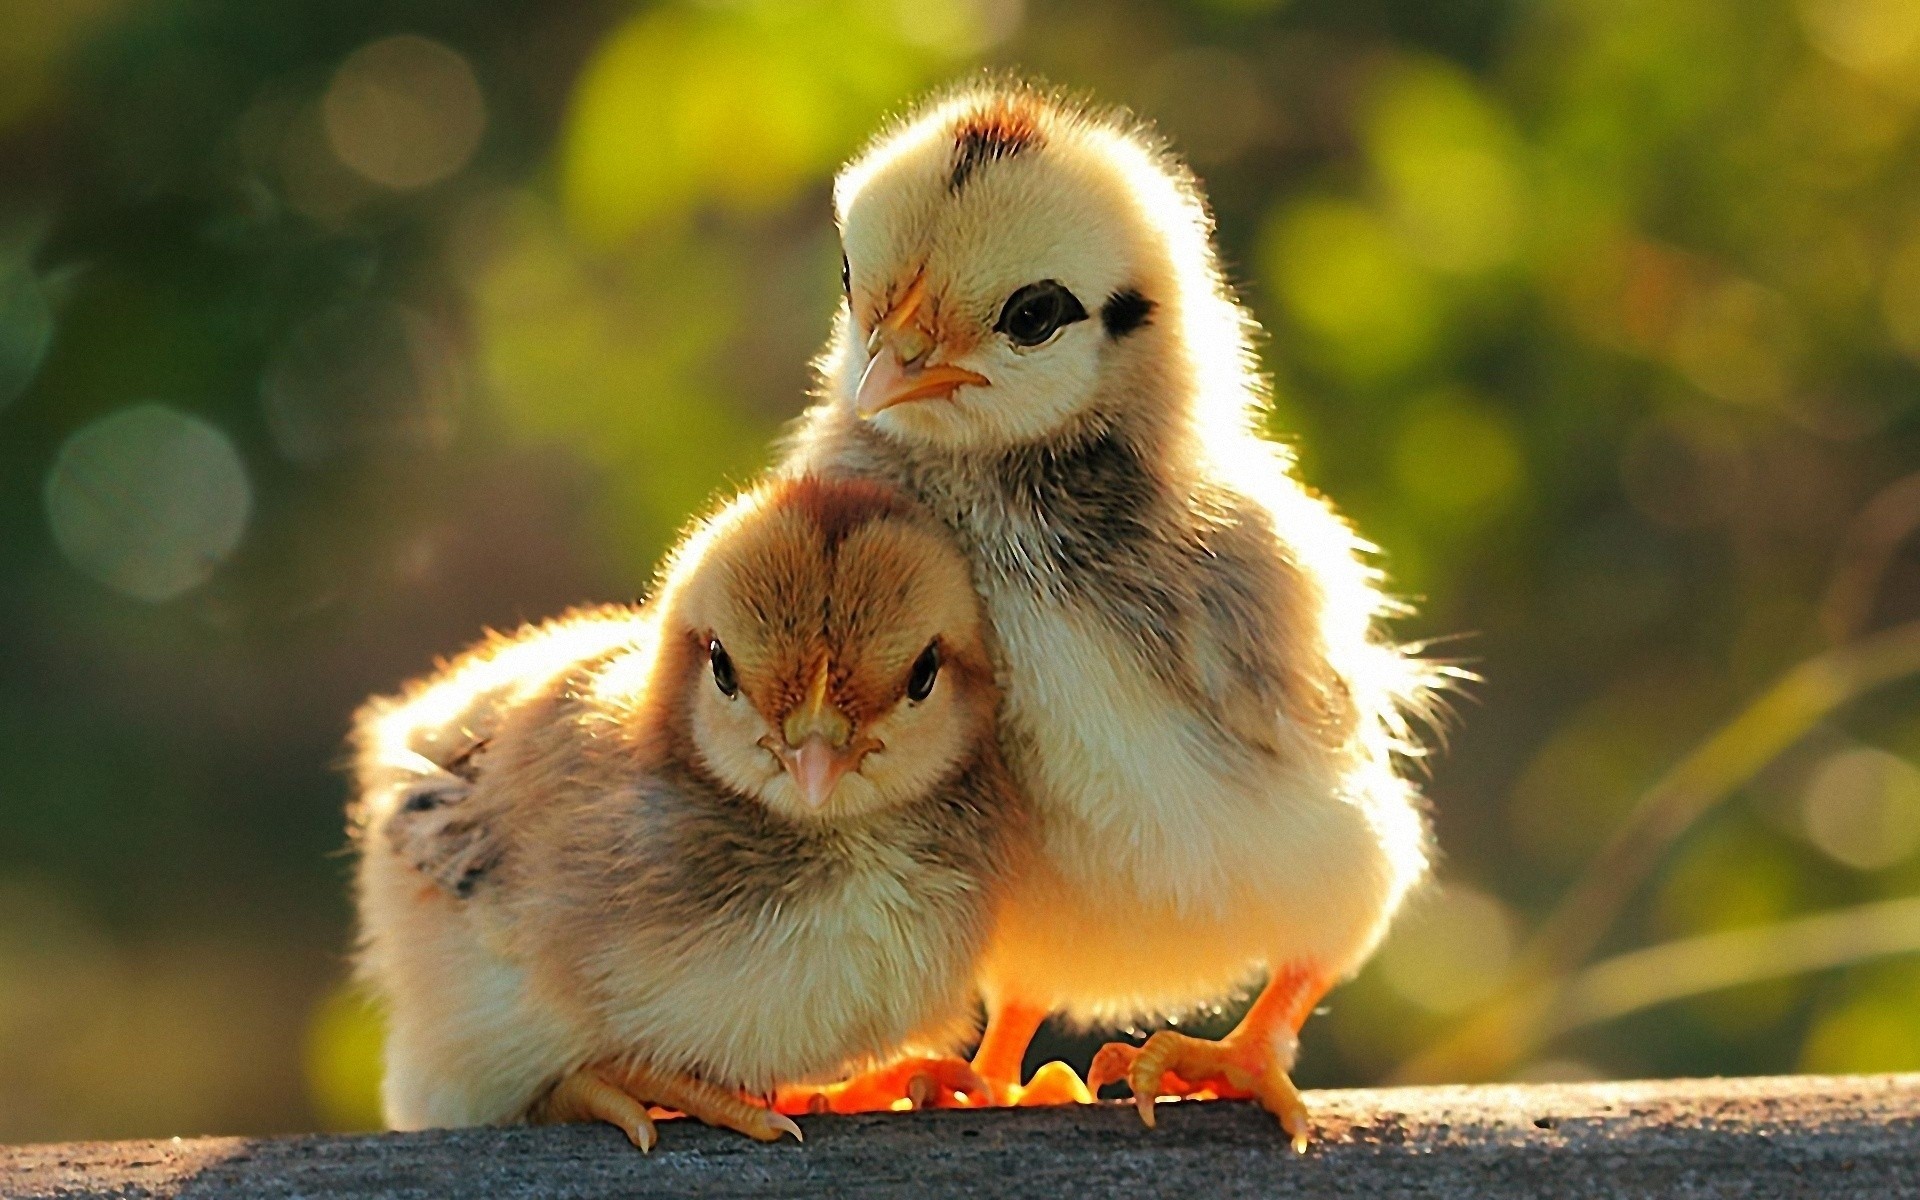 Little Chickens. Android wallpapers for free.